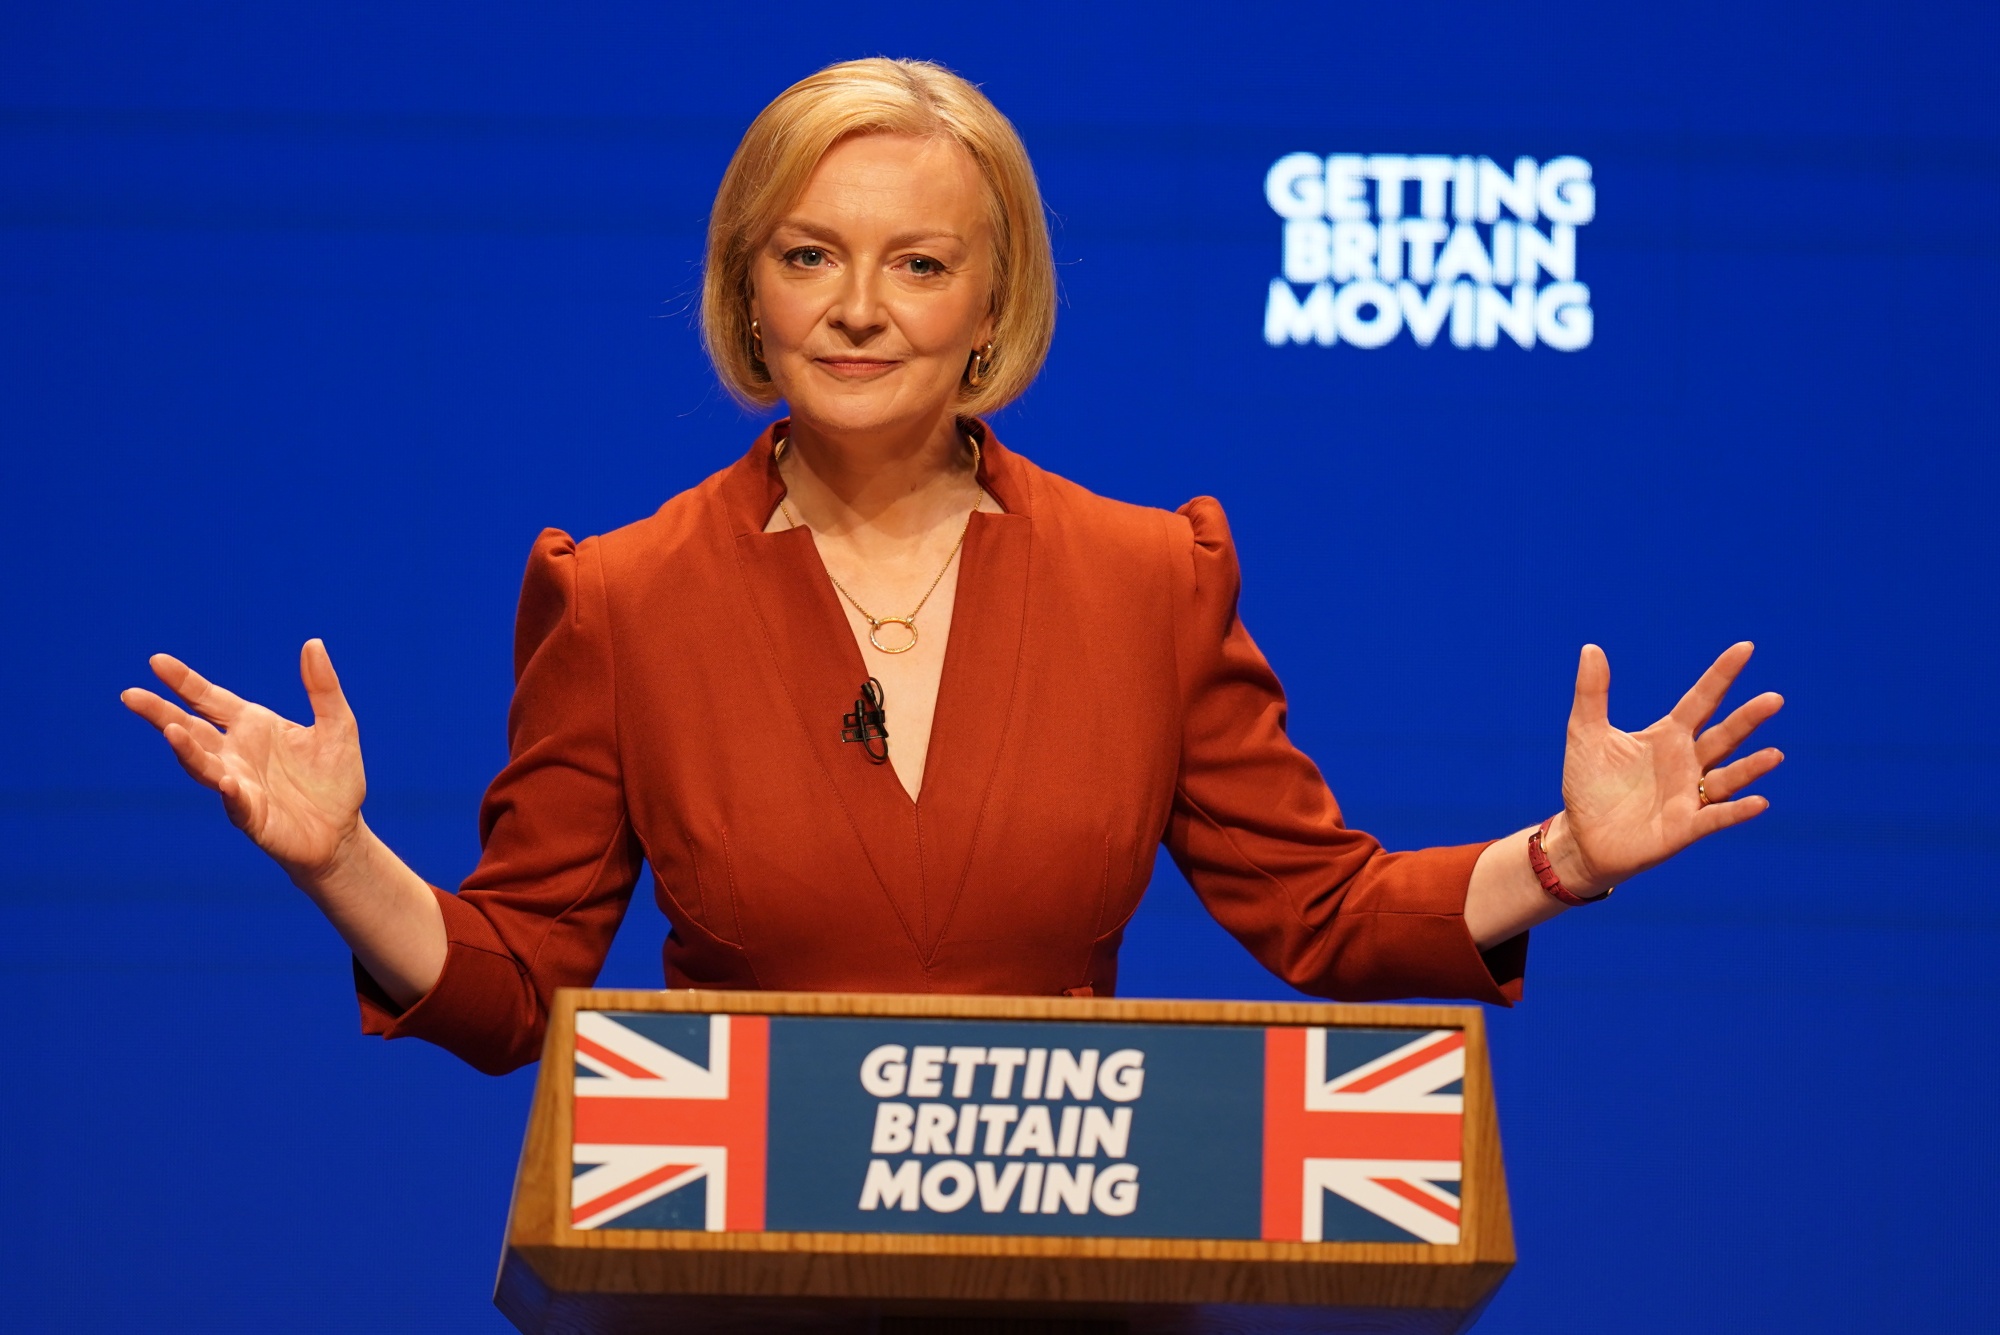 Prime Minister Liz Truss delivers her keynote speech at the Conservative Party annual conference at the International Convention Centre in Birmingham on Oct. 5.